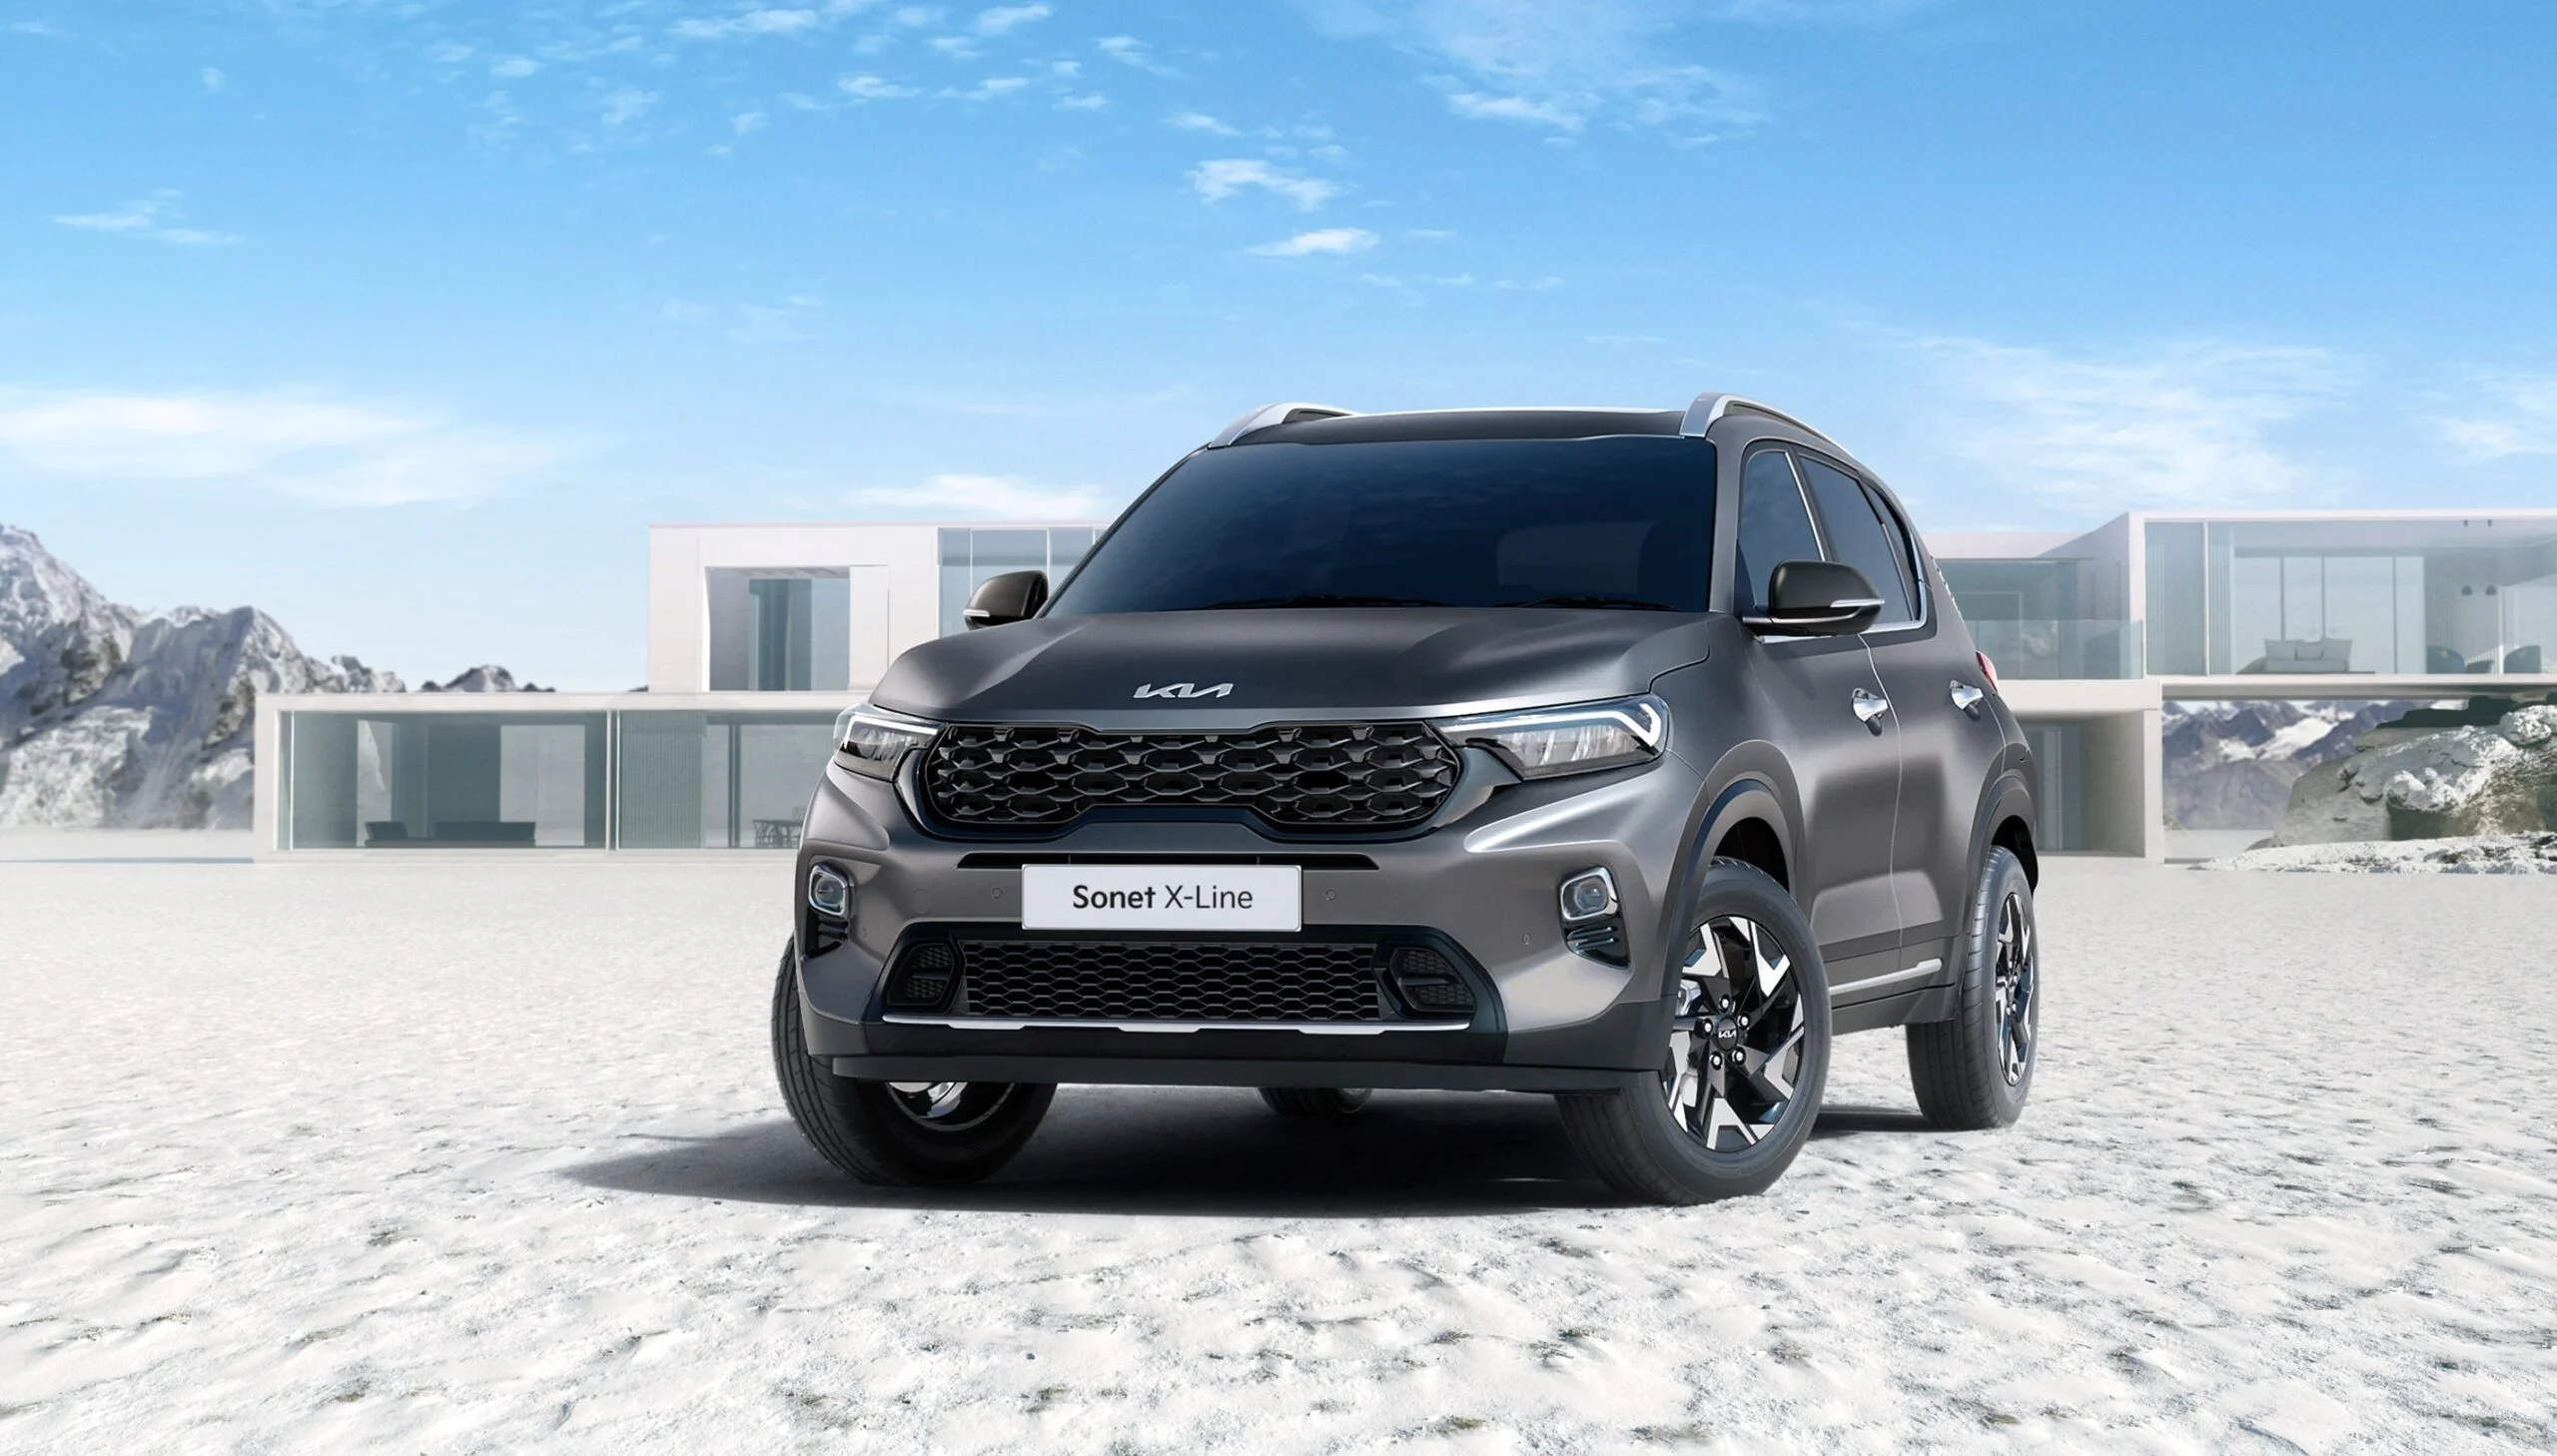 2022 Kia Sonet X-Line Launched - Prices Start From 13.69 Lakhs (3)